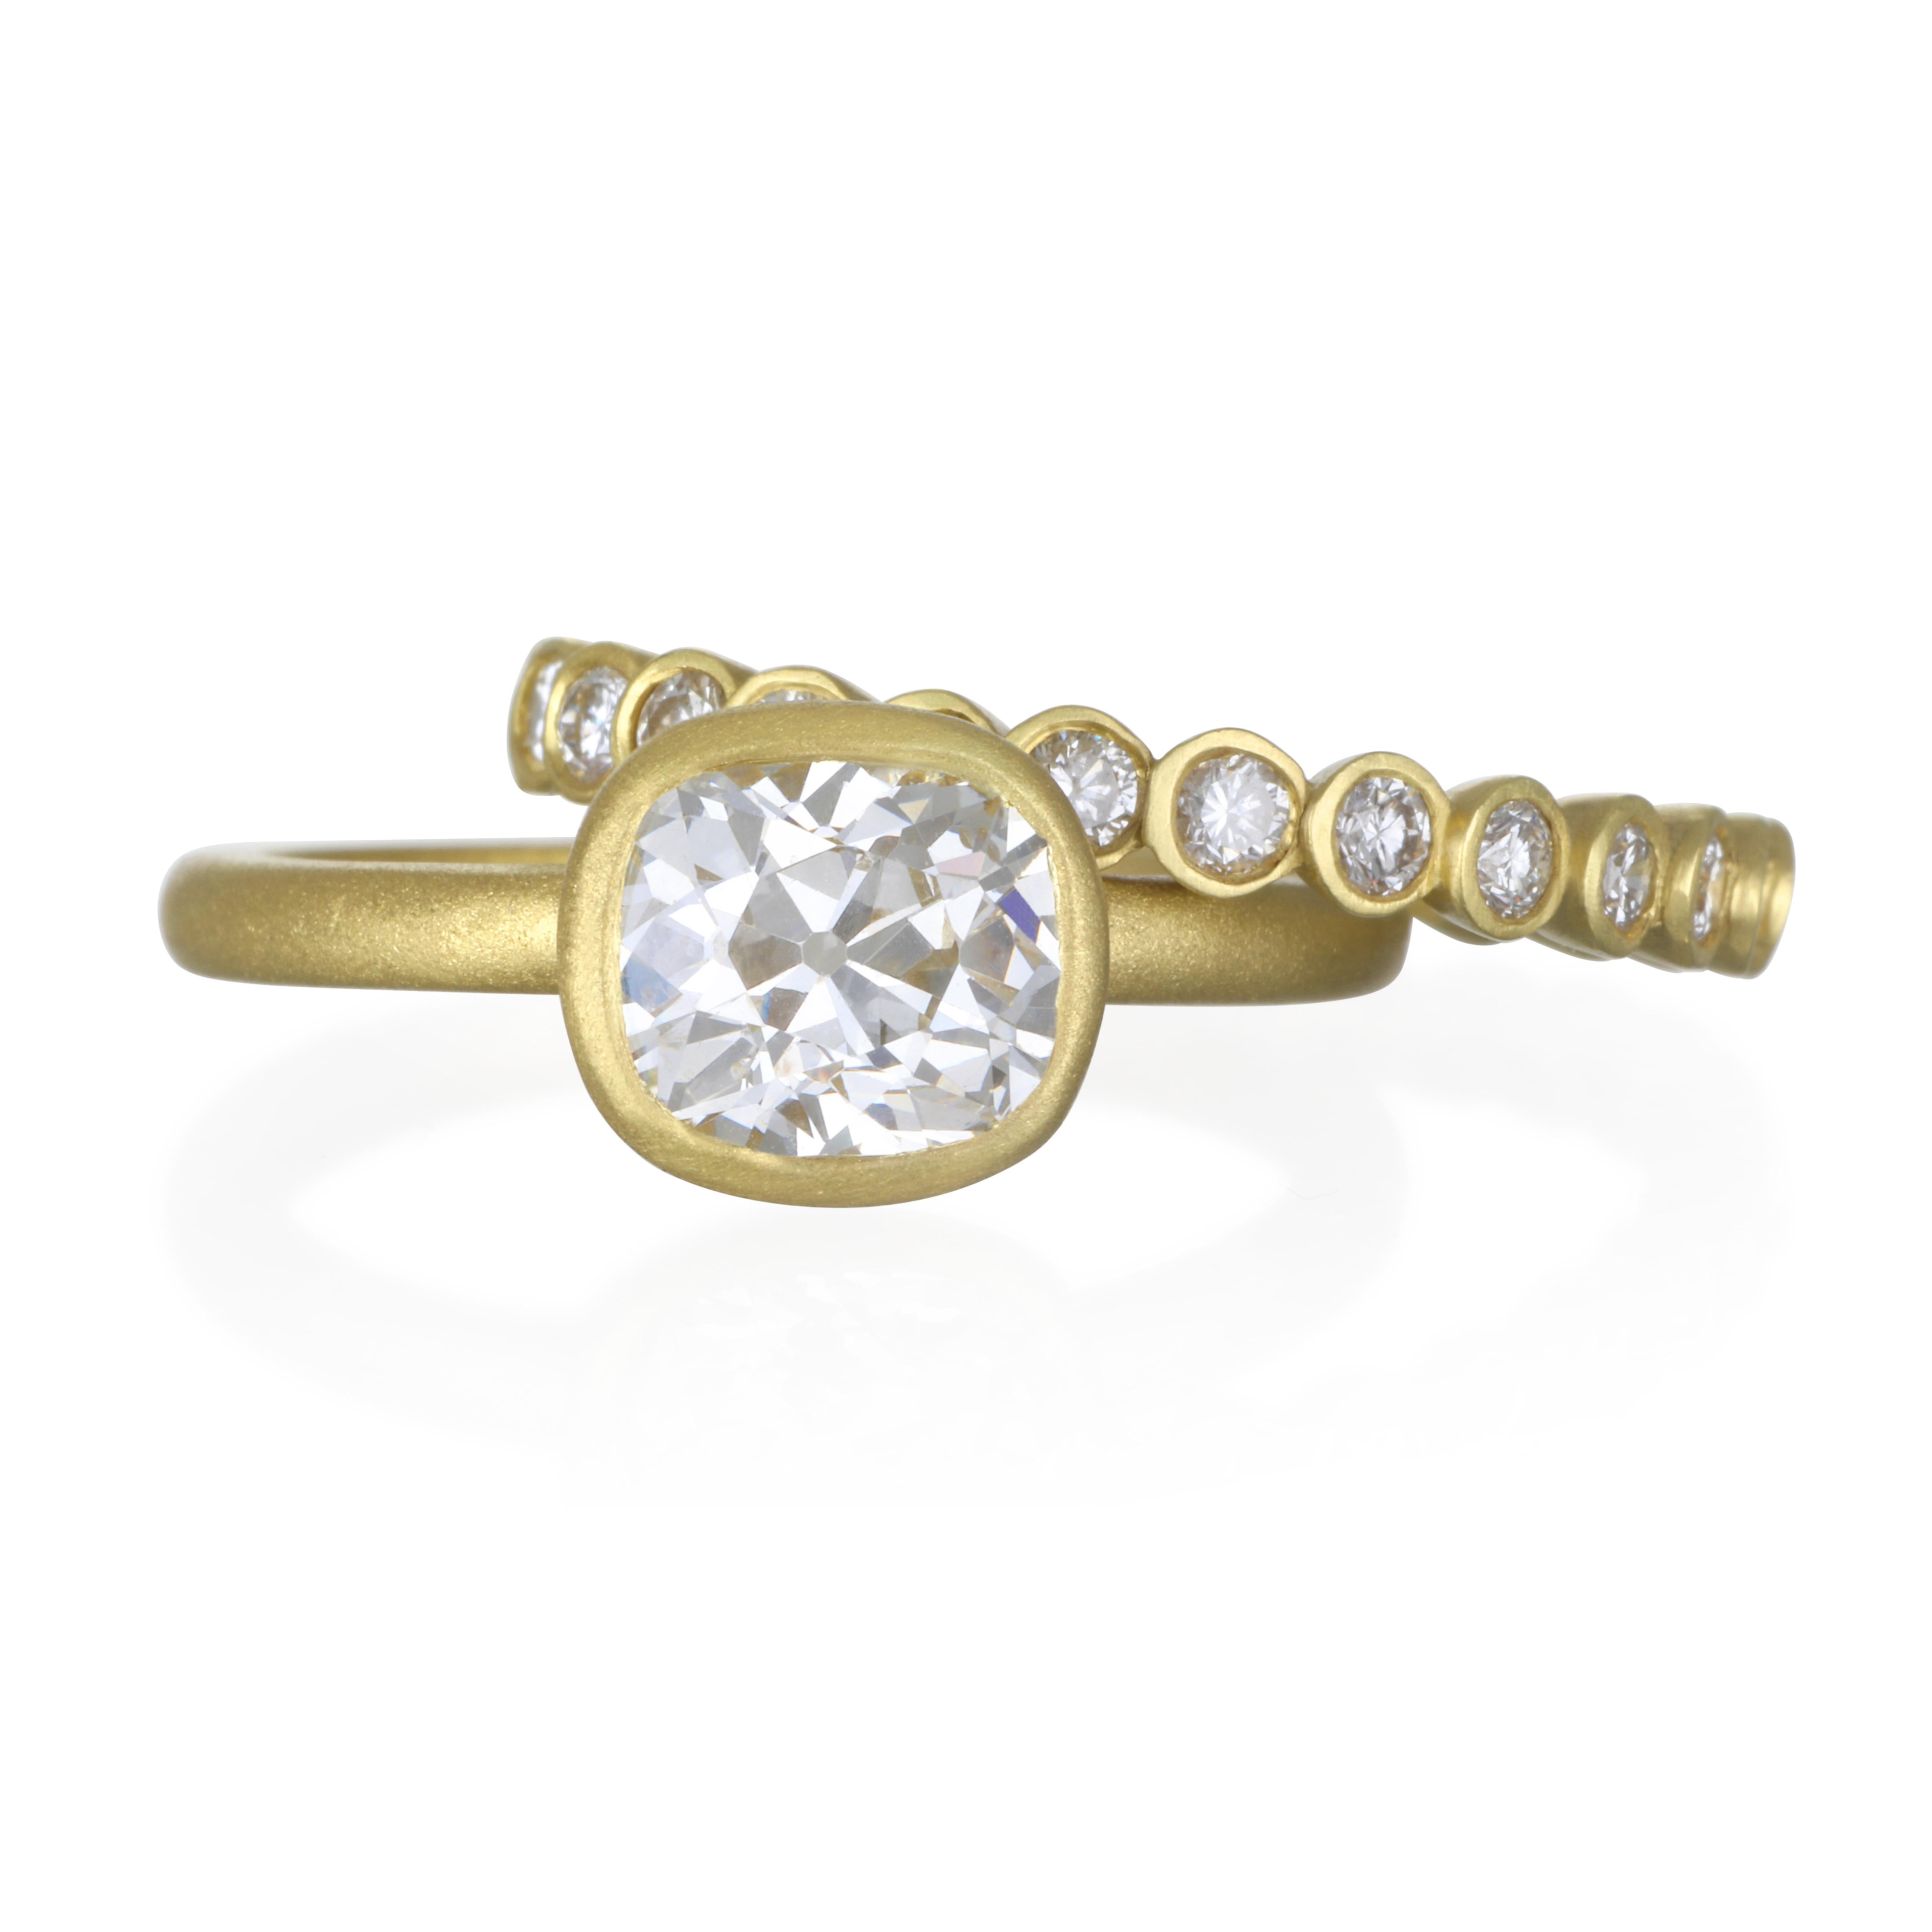 Faye Kim's 18k gold diamond bezel ring with a matte finish.
Bright, white diamonds set in individual bezels for a clean
and contemporary feel.  

Diamonds:  1.04 Carats twt
Width: 2.7 MM
Size:  7
